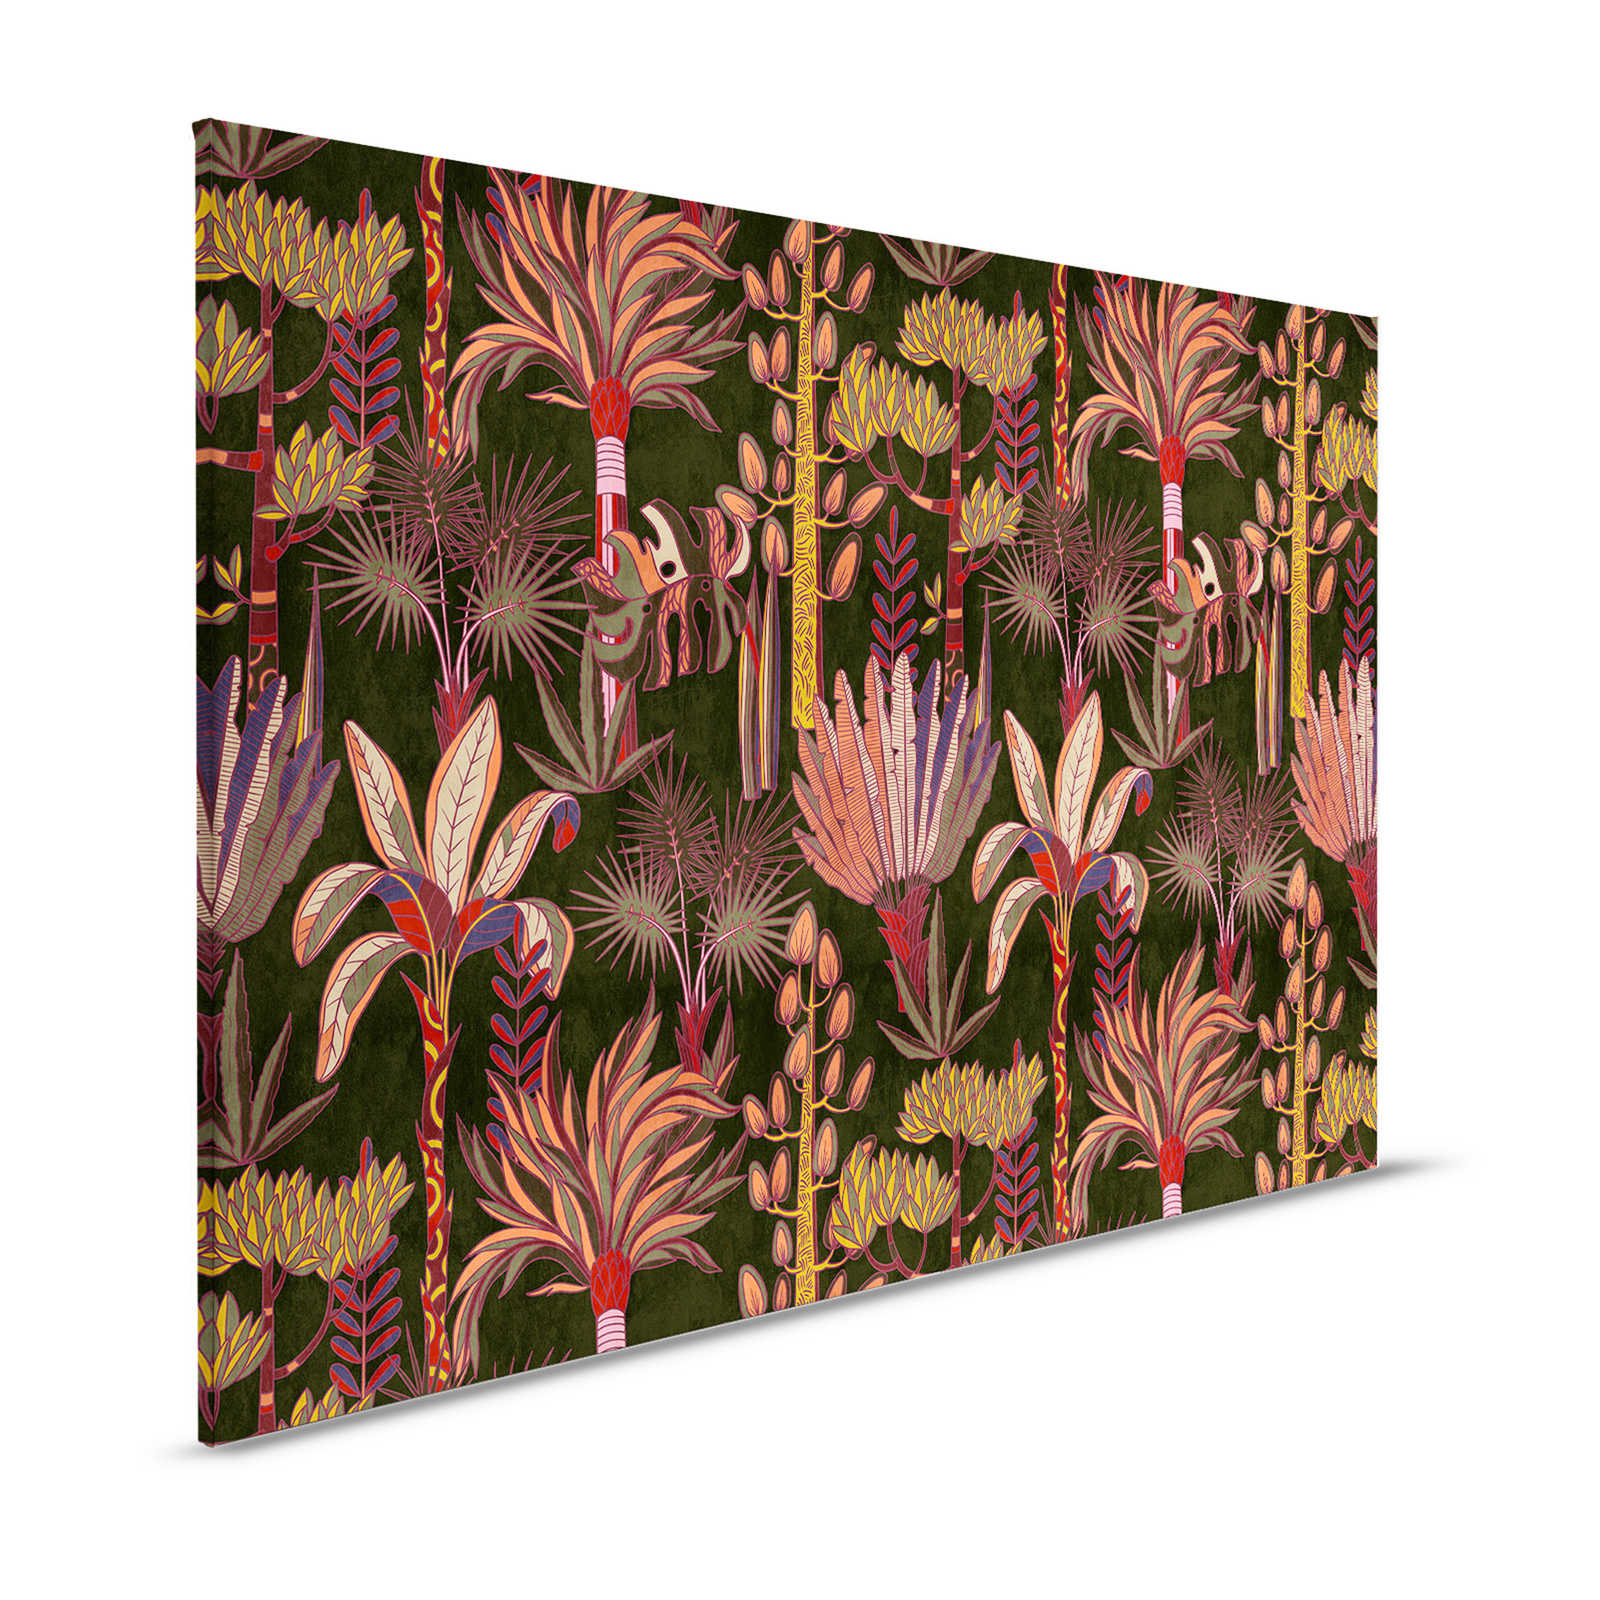 Lagos 1 - Palm trees canvas picture colourful graphic style in textile look - 1,20 m x 0,80 m
